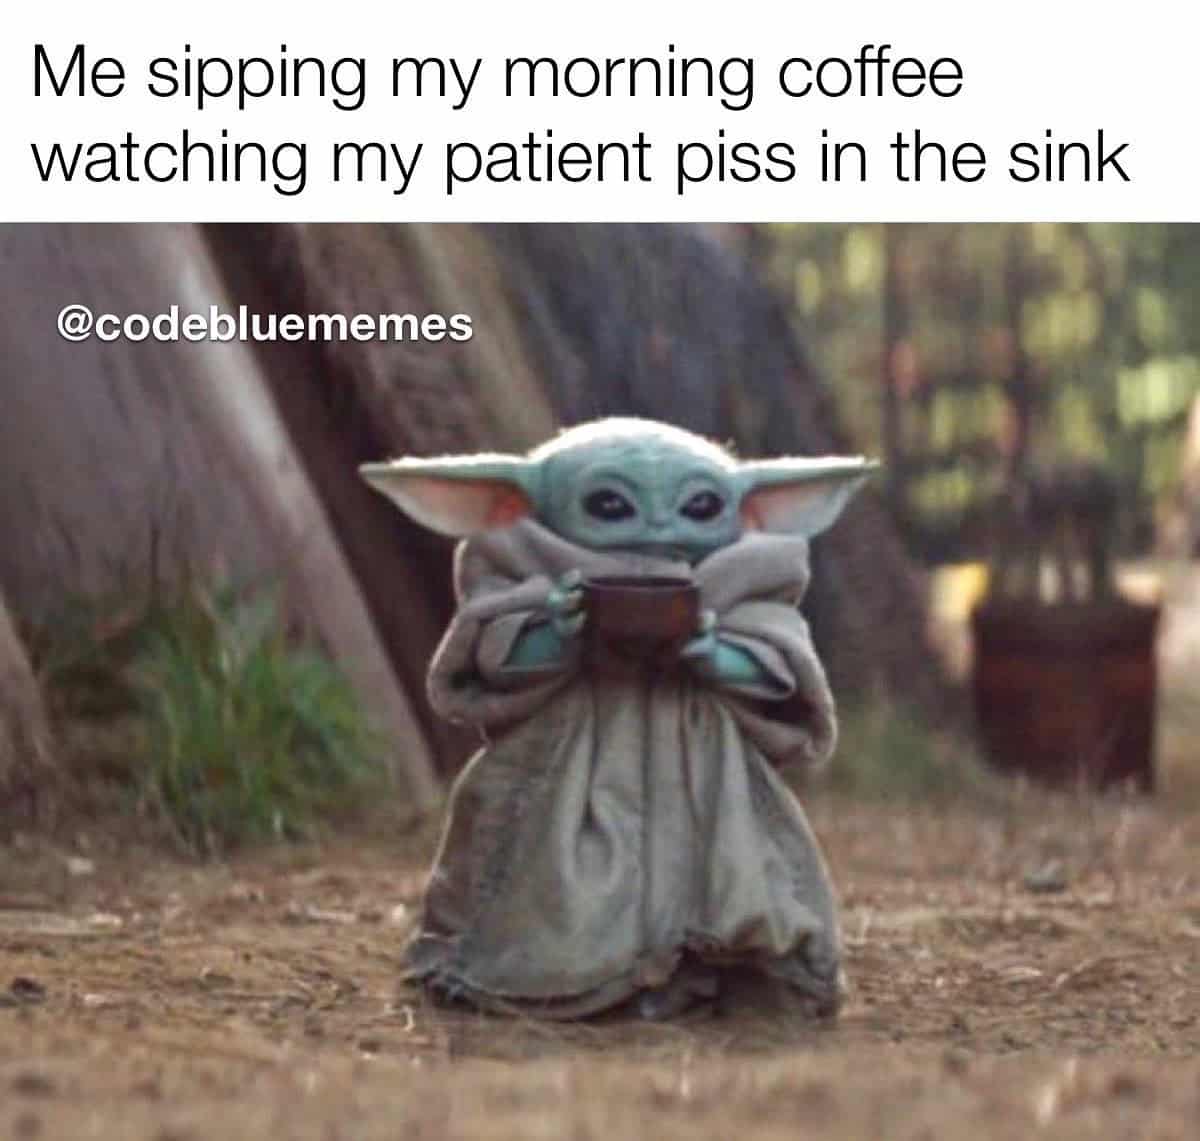 50 Nurse Memes To Look At When You're Not Charting